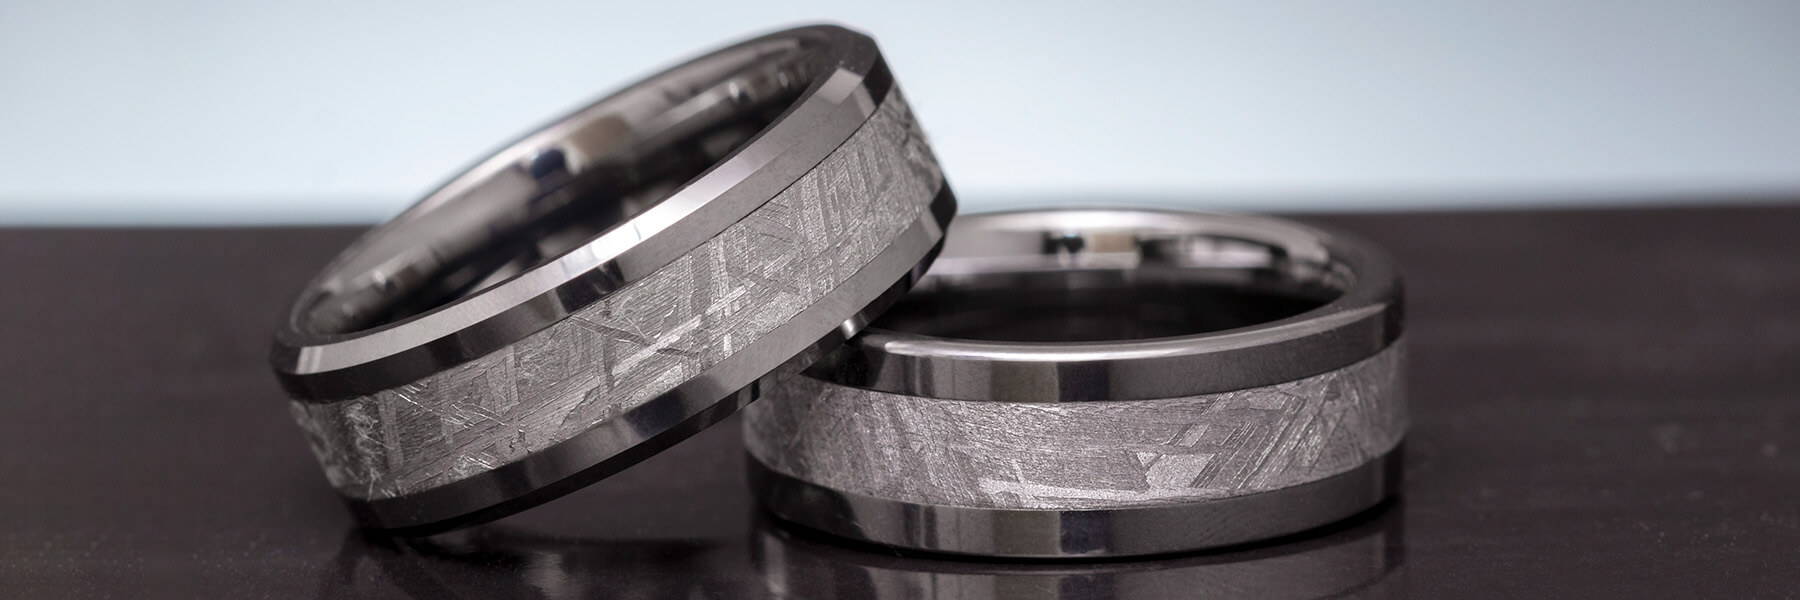 Selecting the Ideal Wedding Band Profile